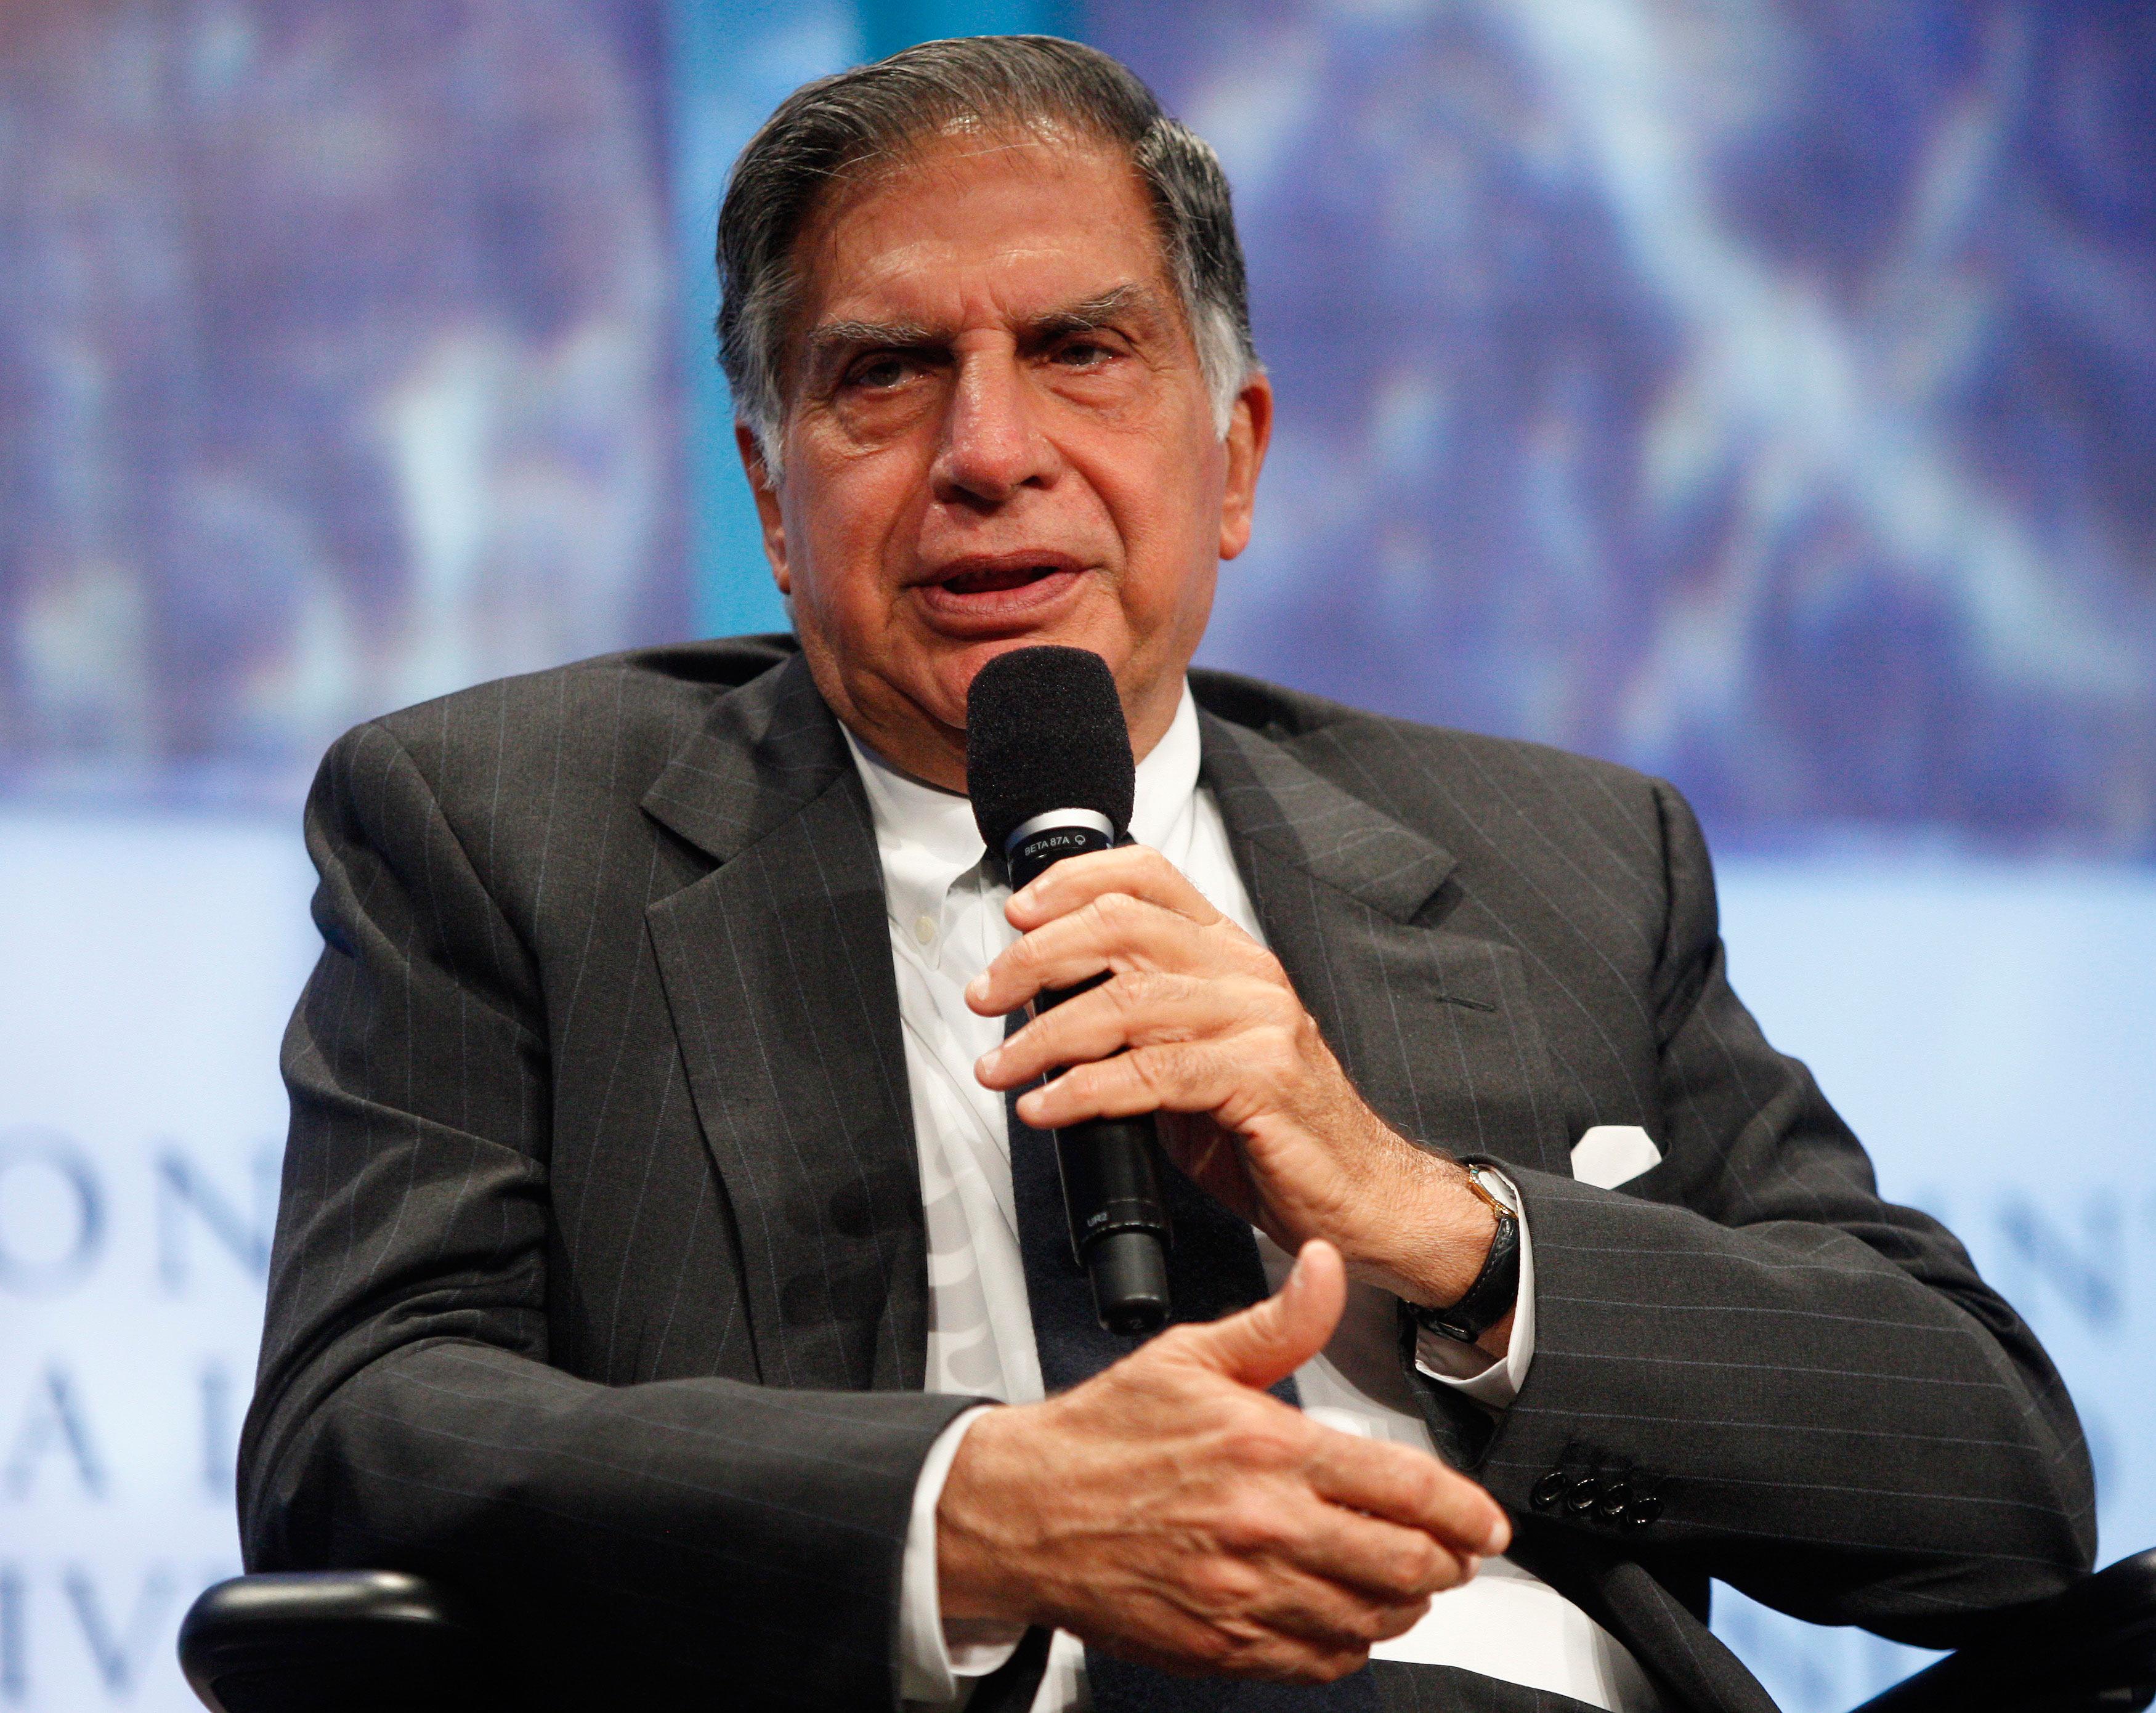 Tata Sons issues preference shares worth $7M to Ratan Tata, others